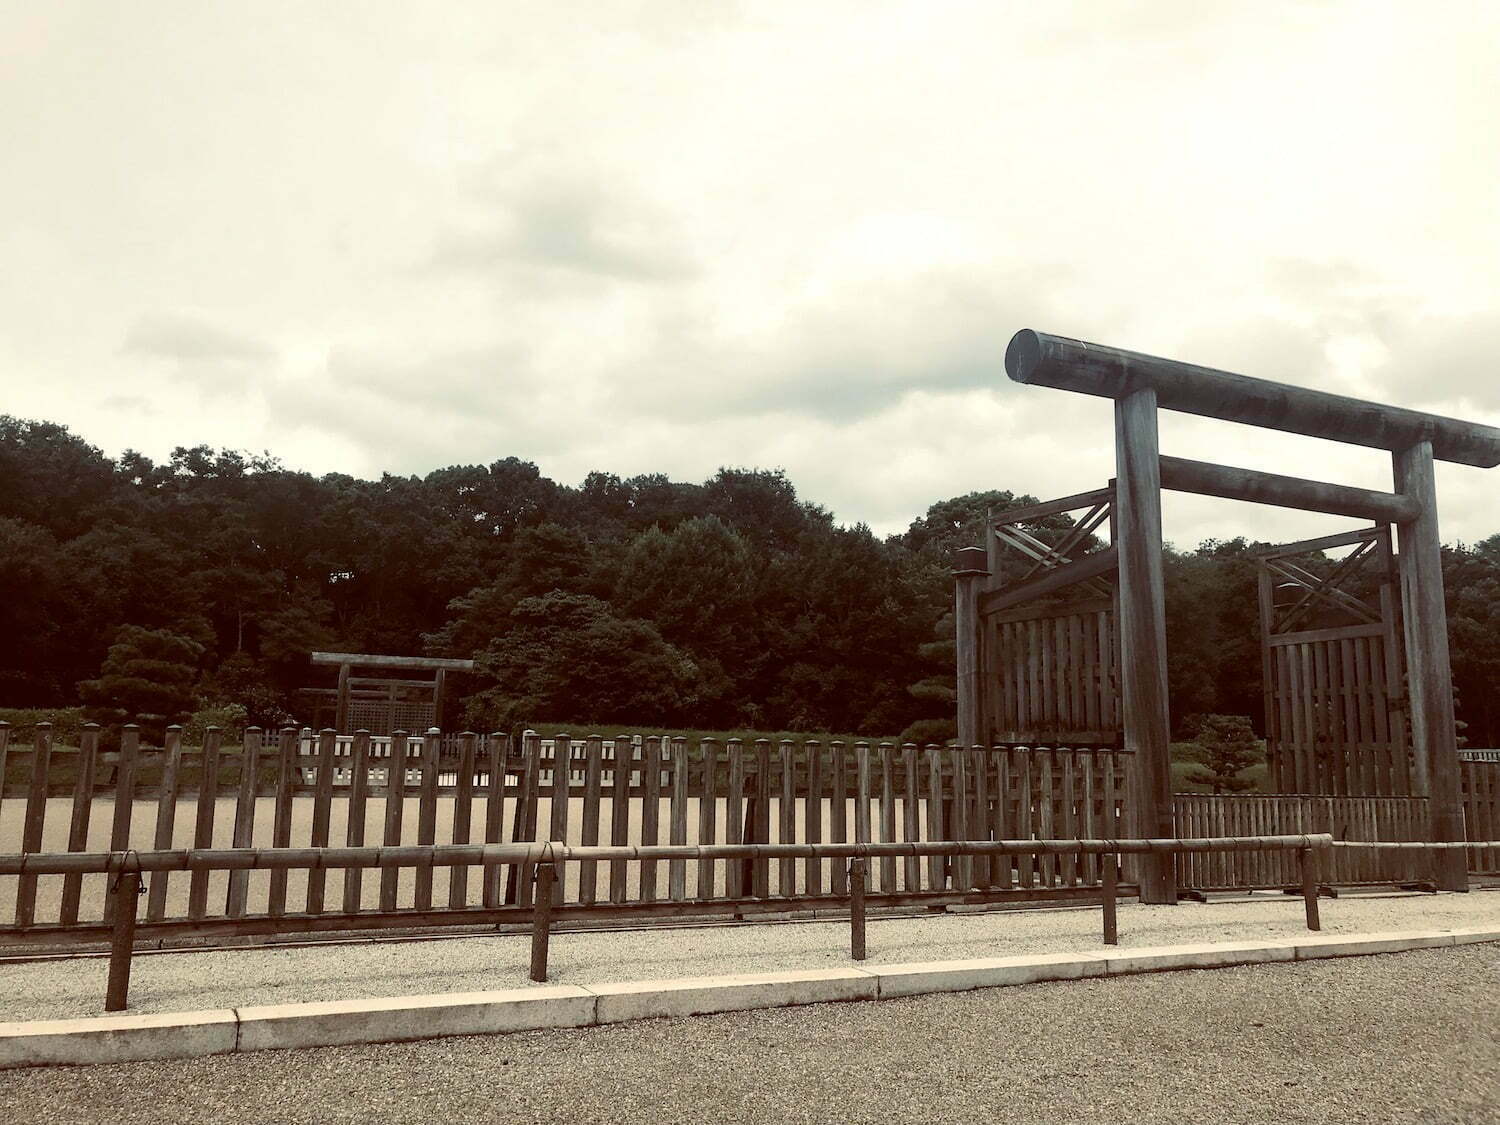 the tomb of the first emperor Jinmu